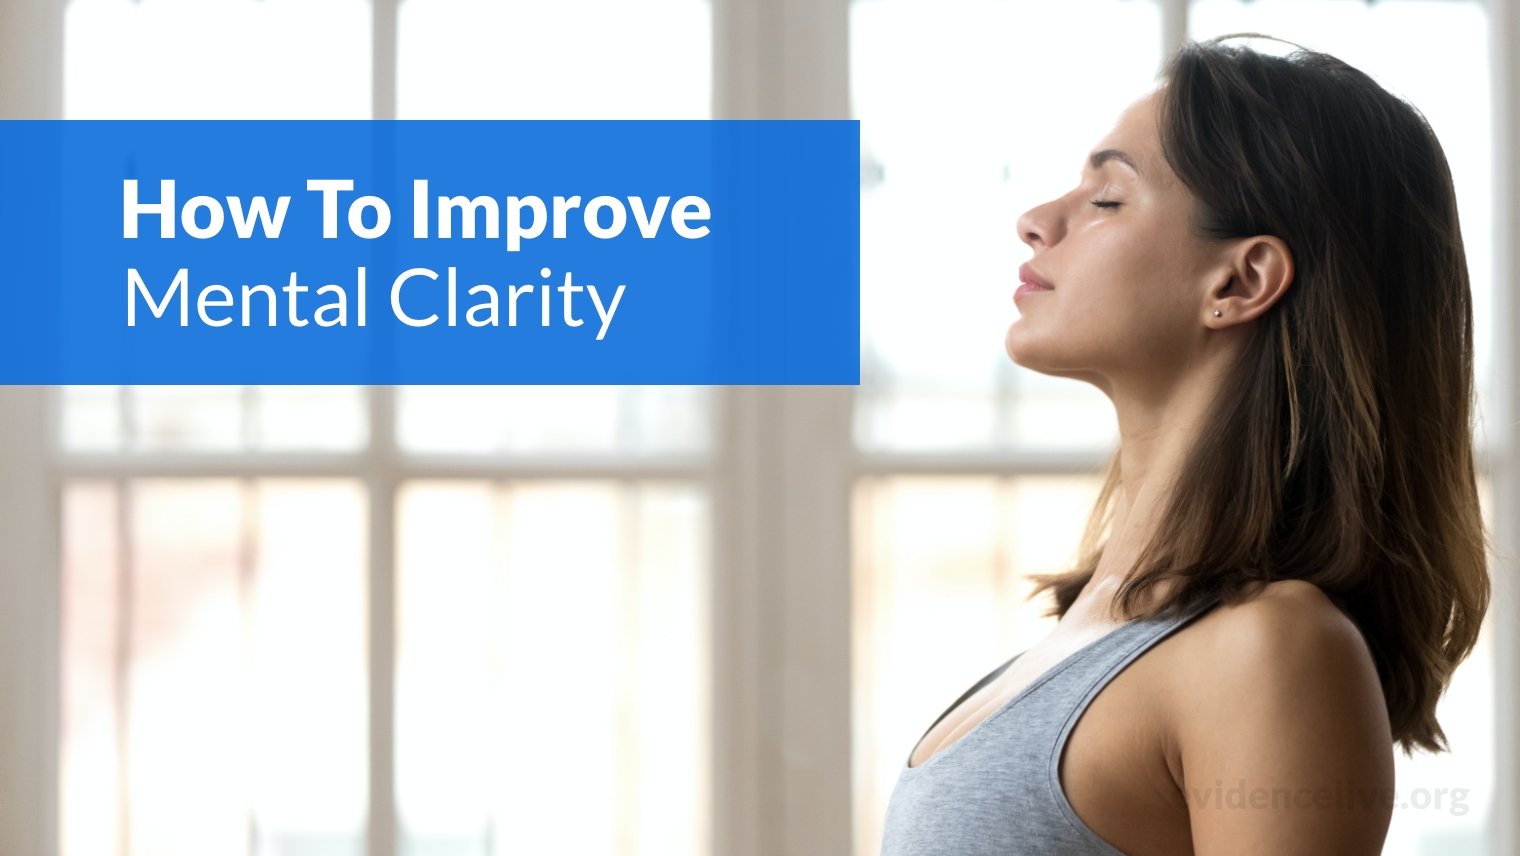 How To Improve Mental Clarity